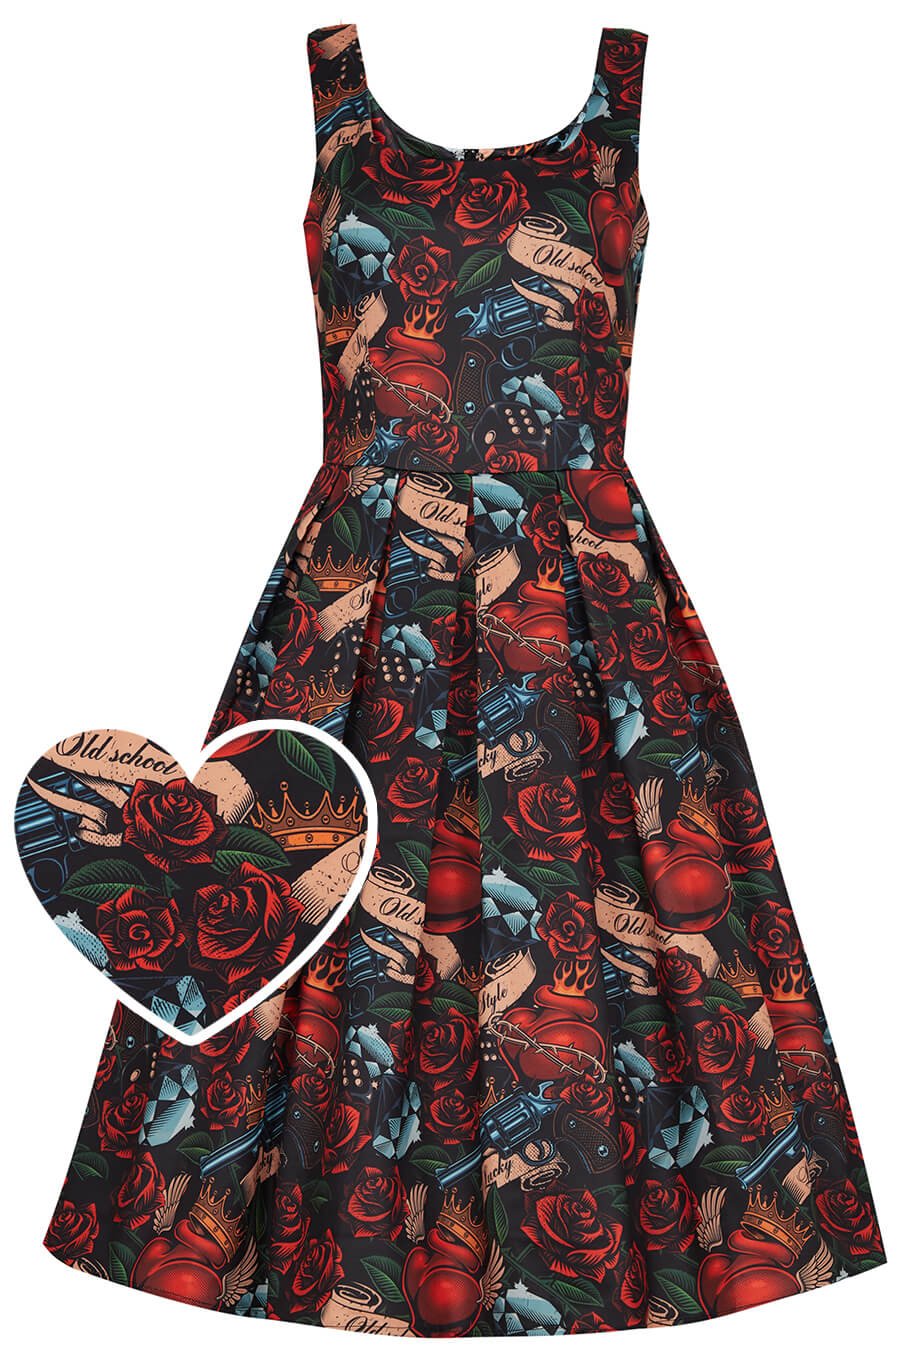 1950s Rockabilly Style Guns N Roses Flared Dress front view